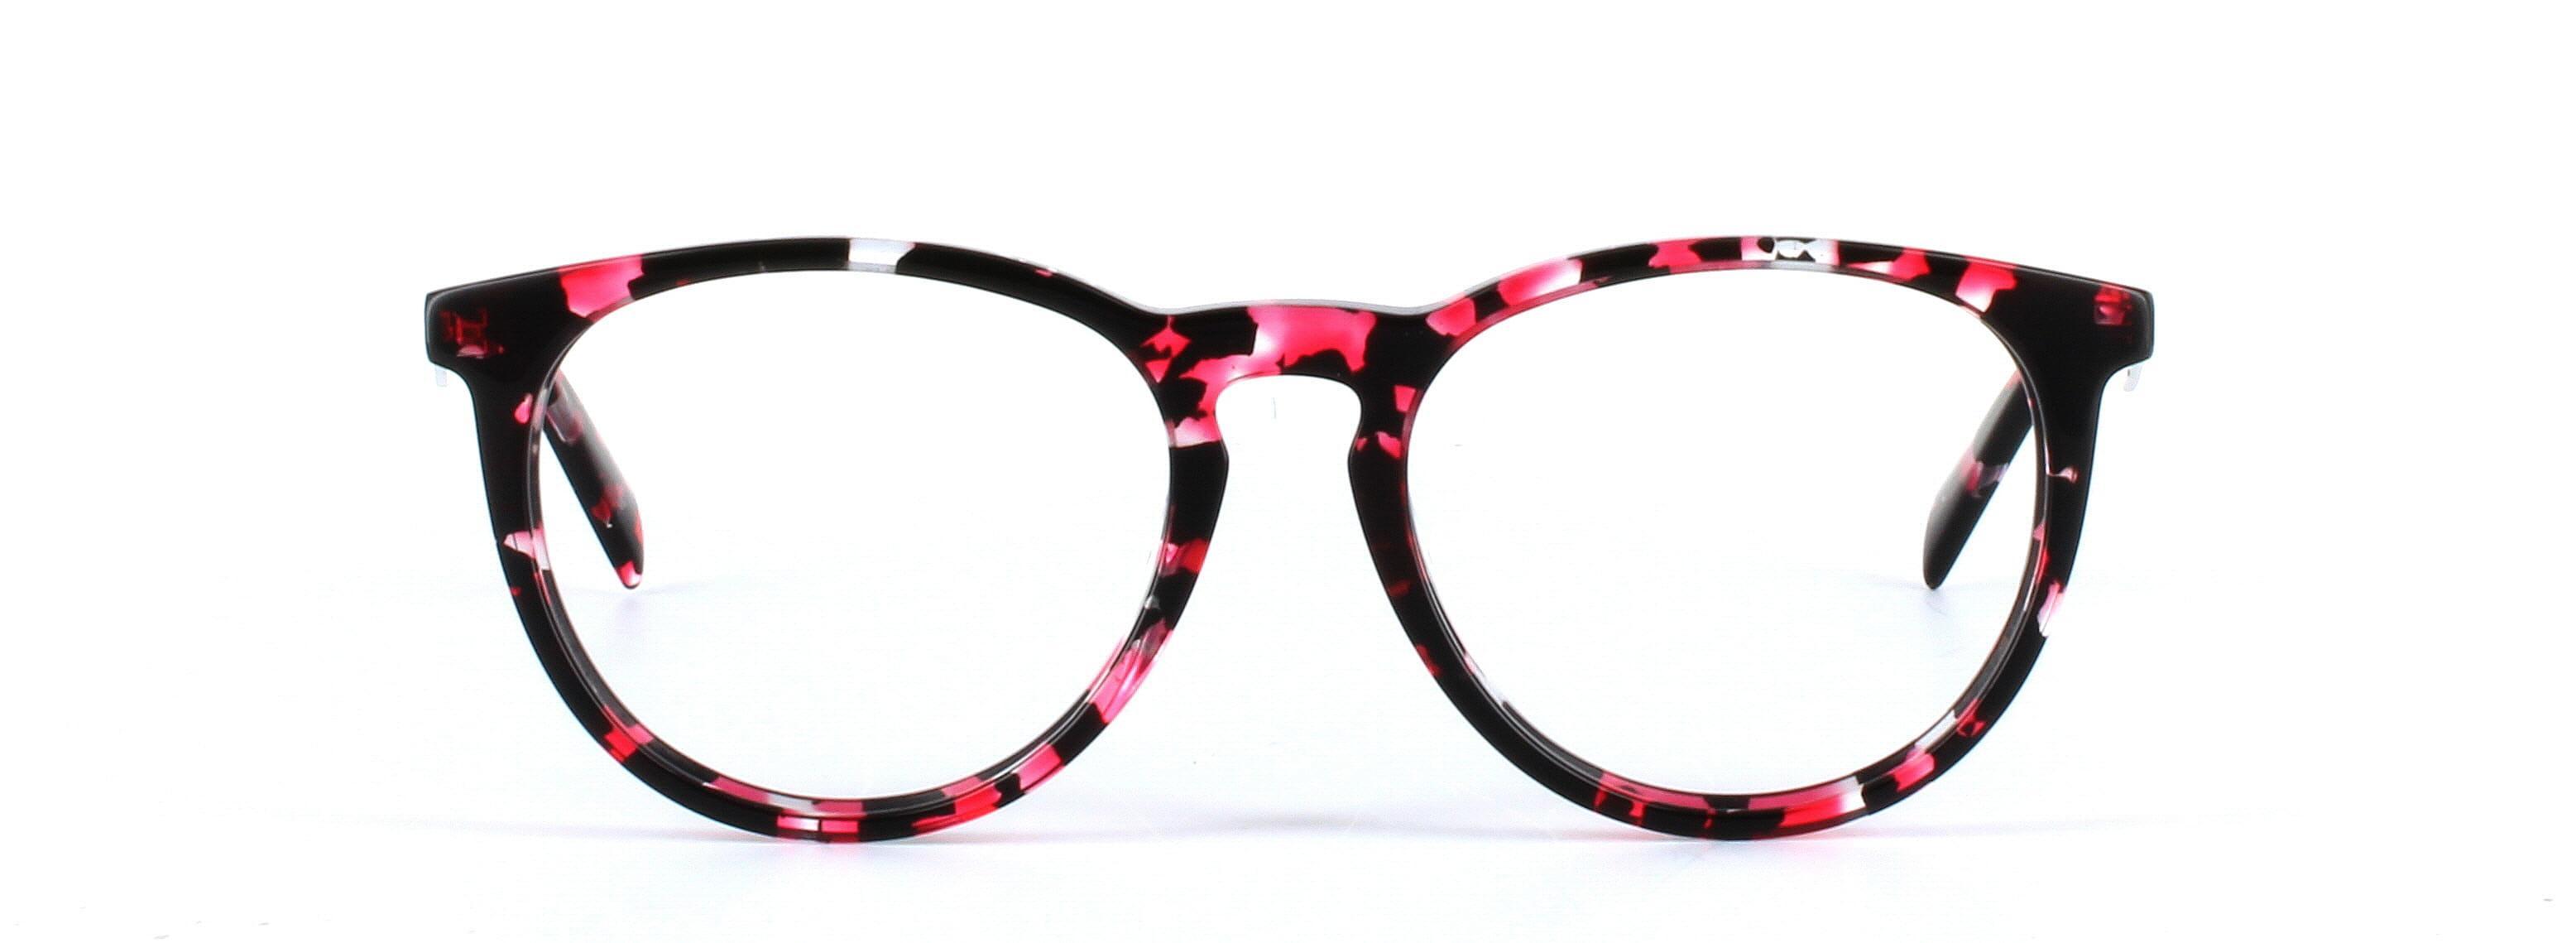 JUST CAVALLI (JC0879-55A) Black and Red Full Rim Round Acetate Glasses - Image View 5